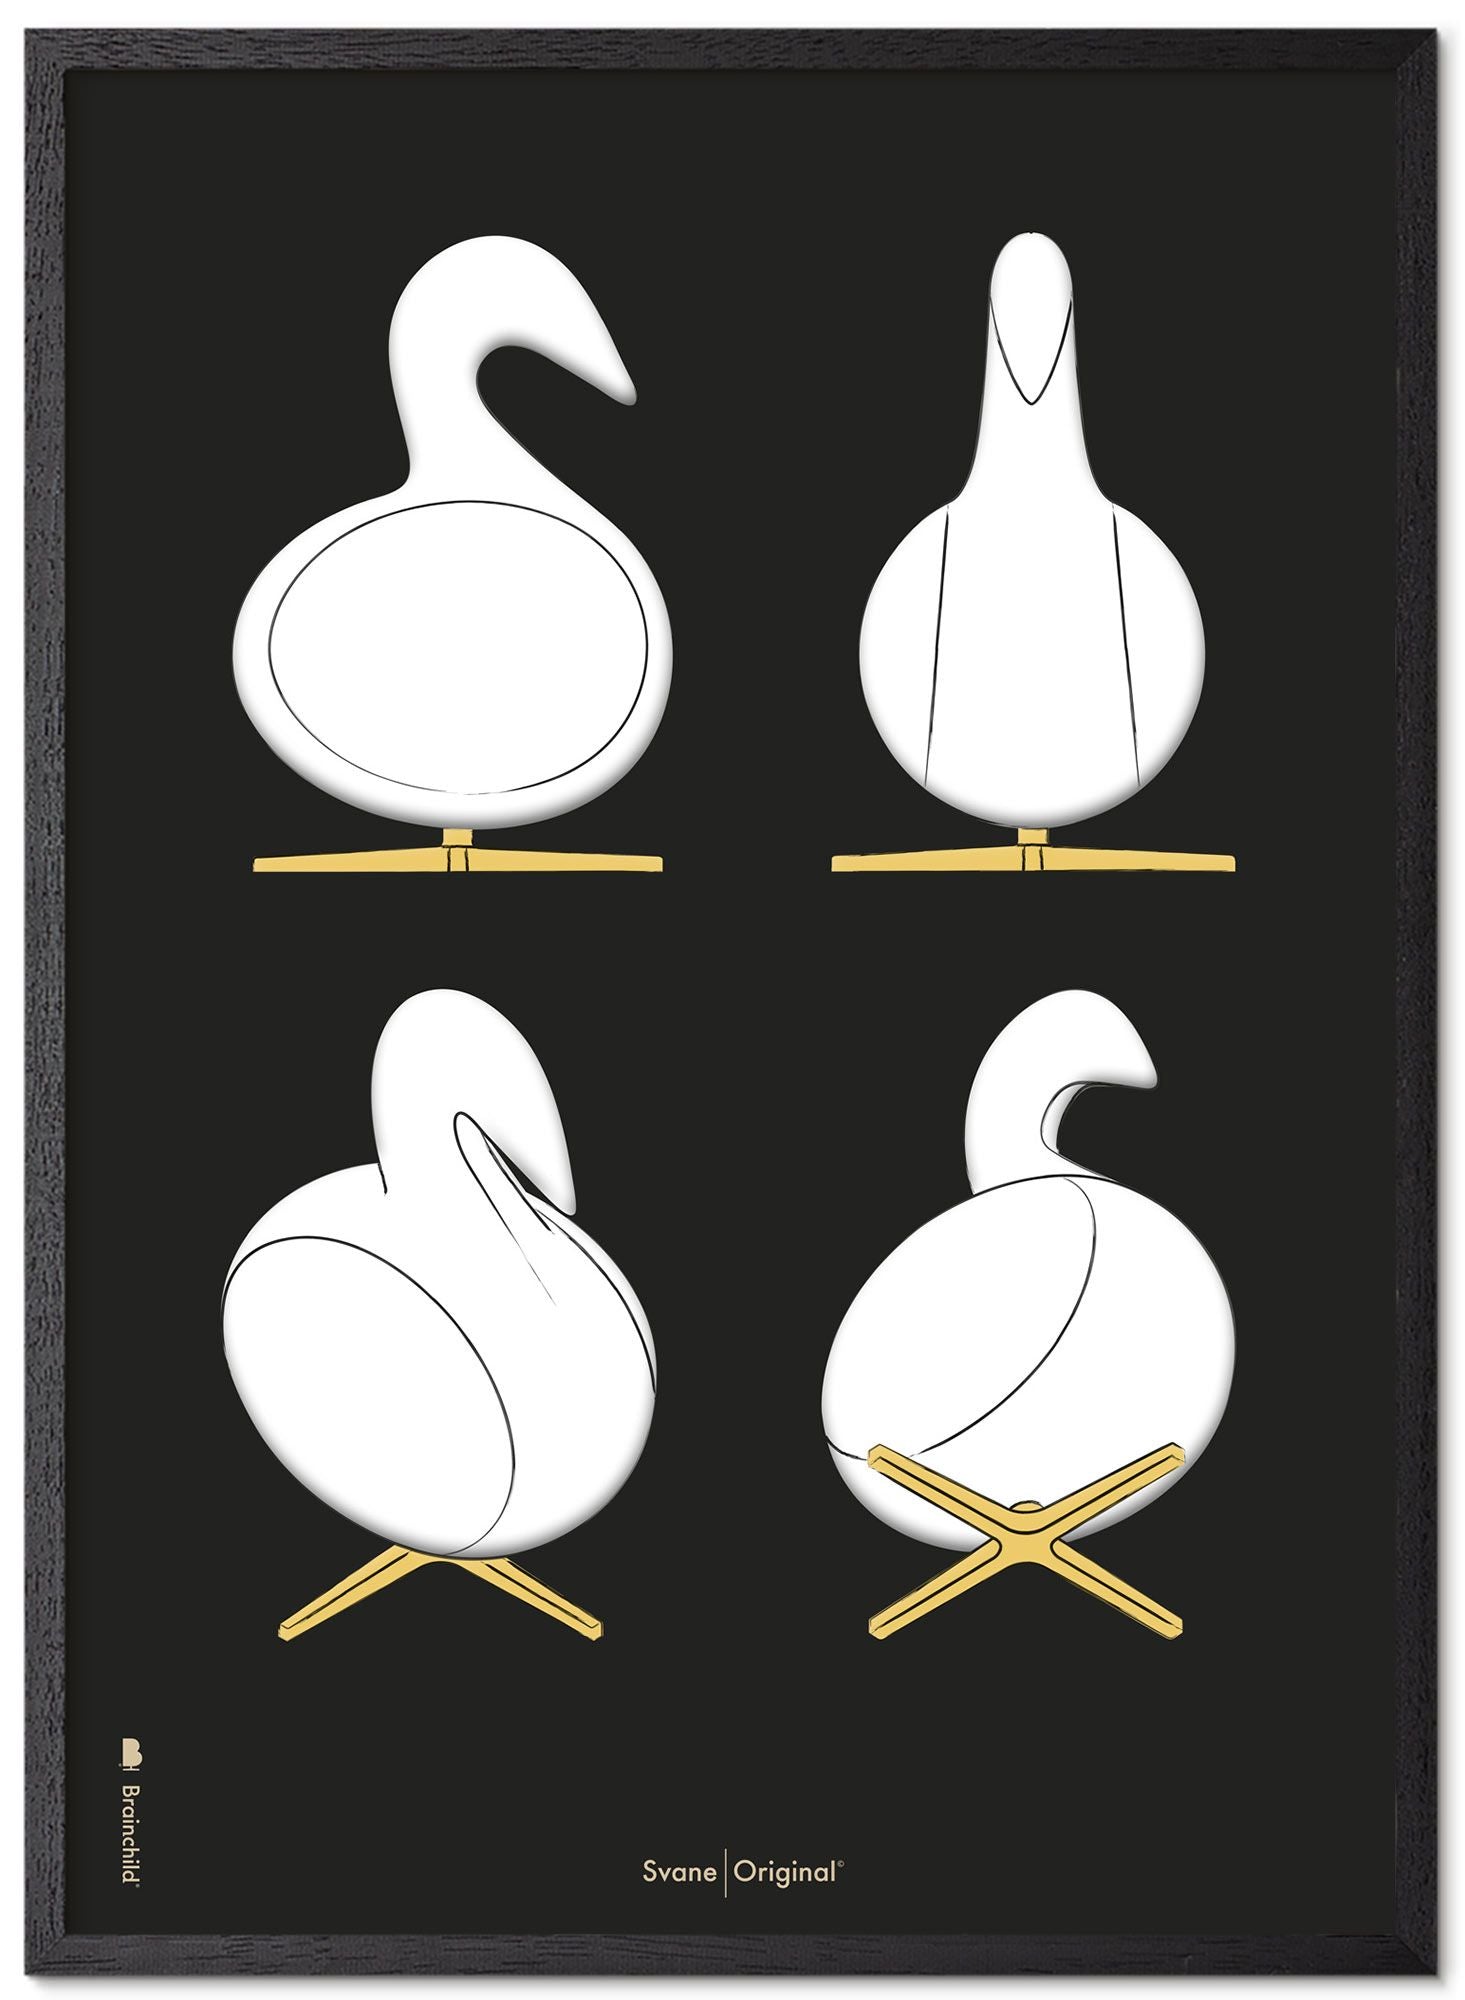 Brainchild Swan Design Sketches Poster Frame Made Of Black Lacquered Wood 30x40 Cm, Black Background